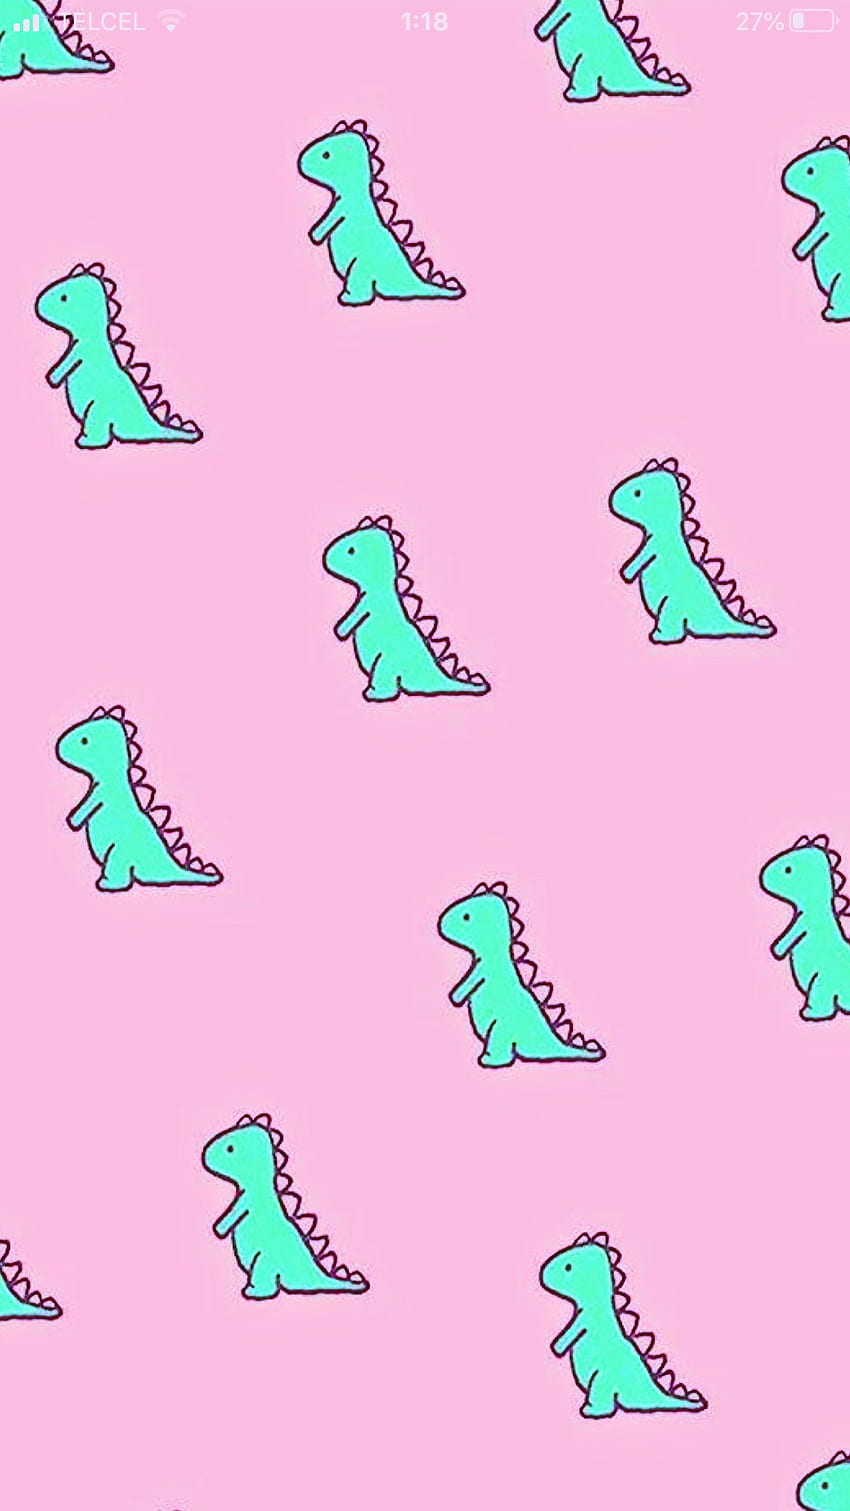 Cute Dinosaurs Seamless Pattern For Kids Textile  Wallpaper  Posters  Cards And Other Design Stock Photo Picture And Royalty Free Image Image  116998682